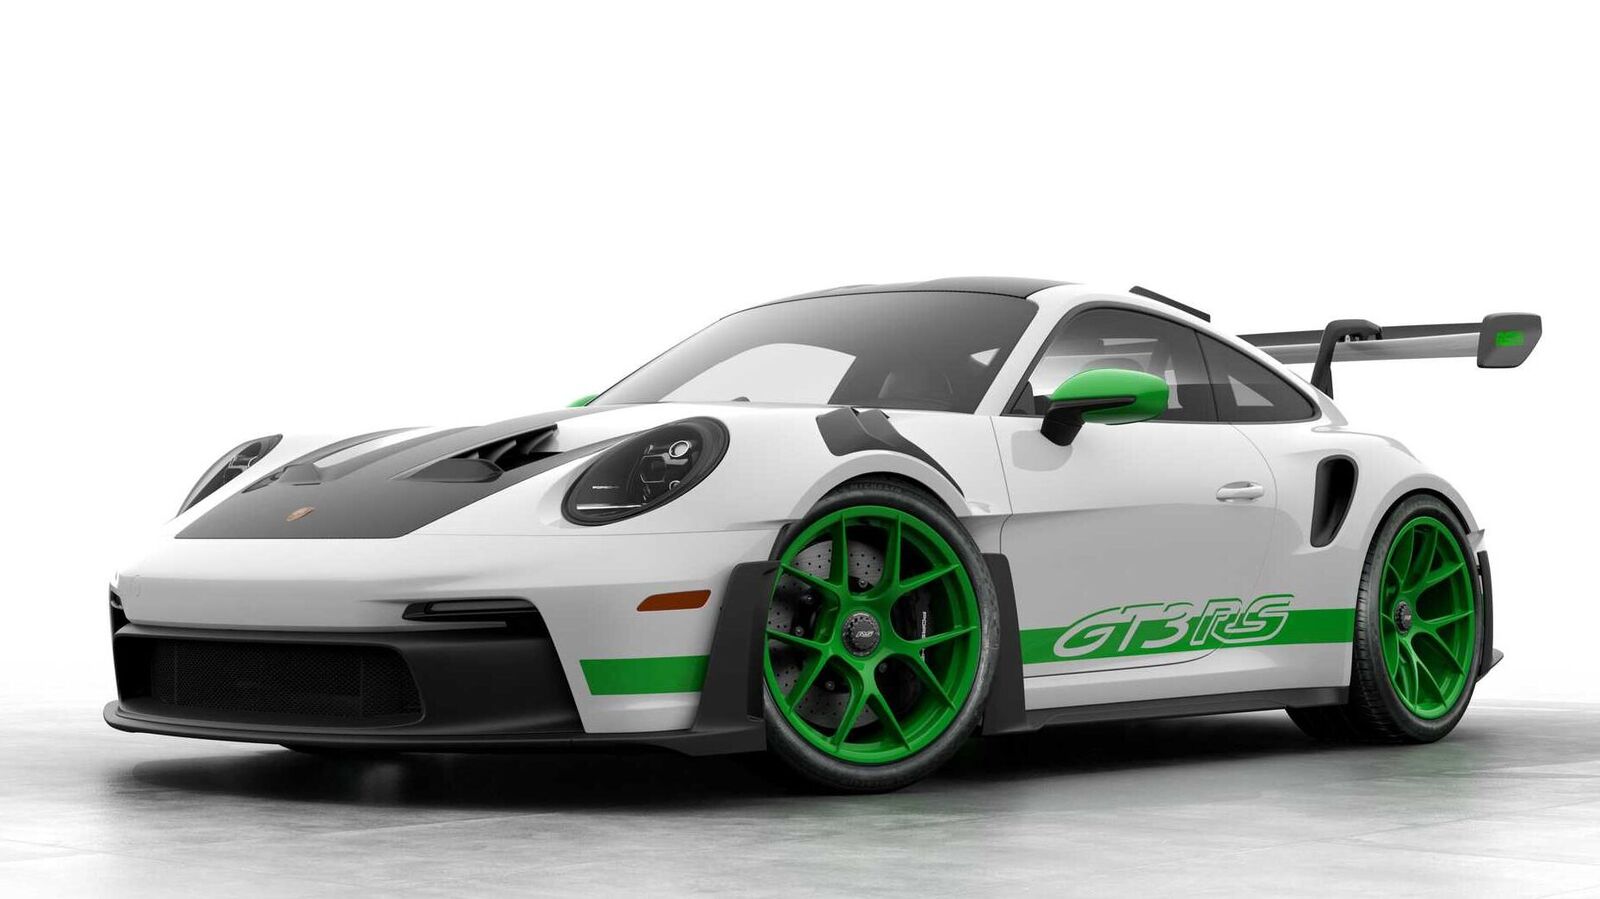 New Porsche 911 GT3 RS launched in India at Rs 3.25 crore - CarWale